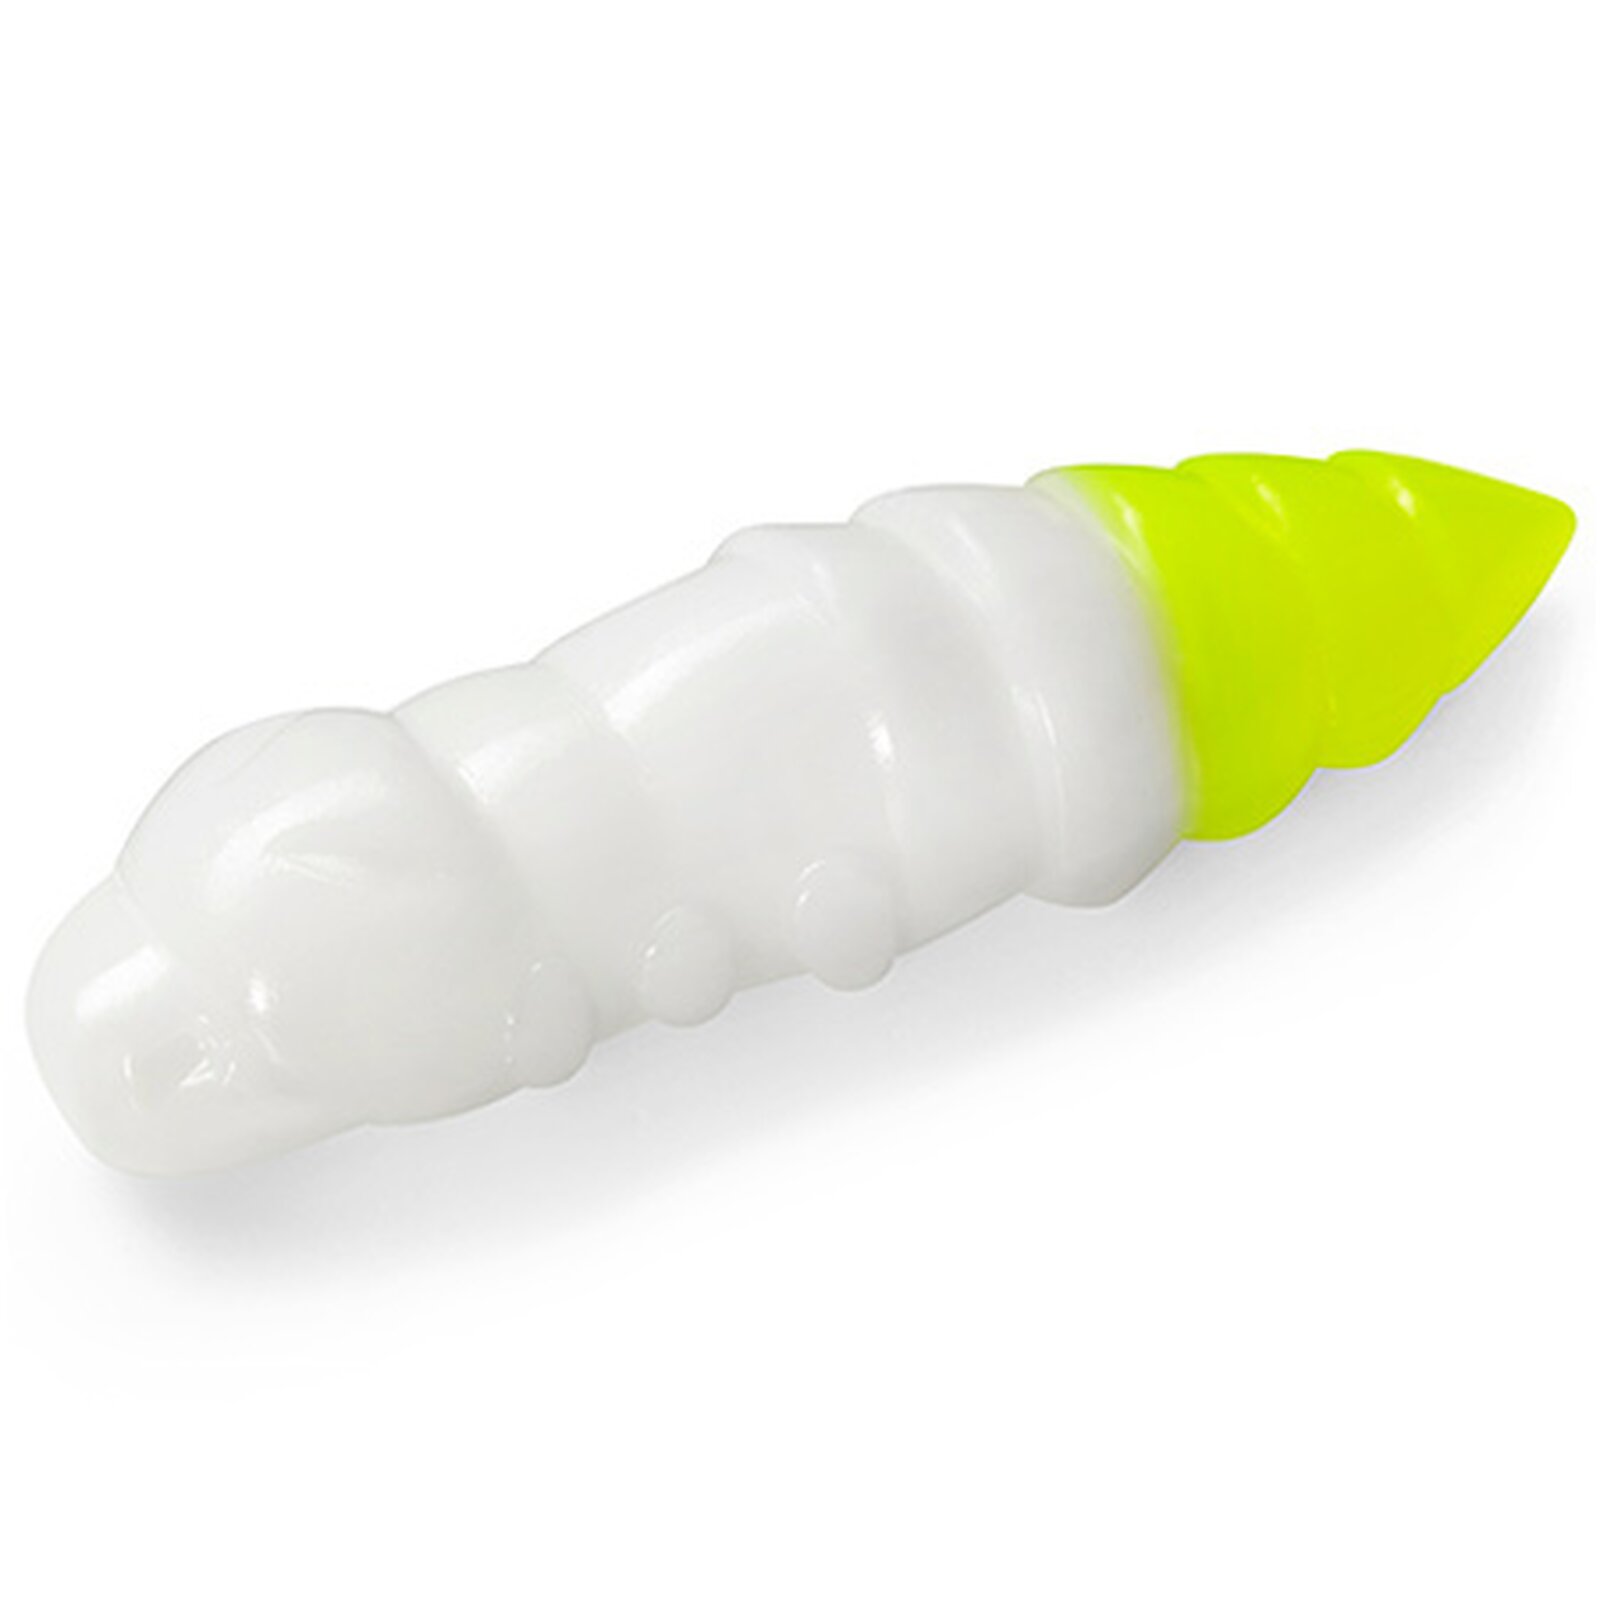 FishUp Pupa #131 - White/Hot Chartreuse Knoblauch